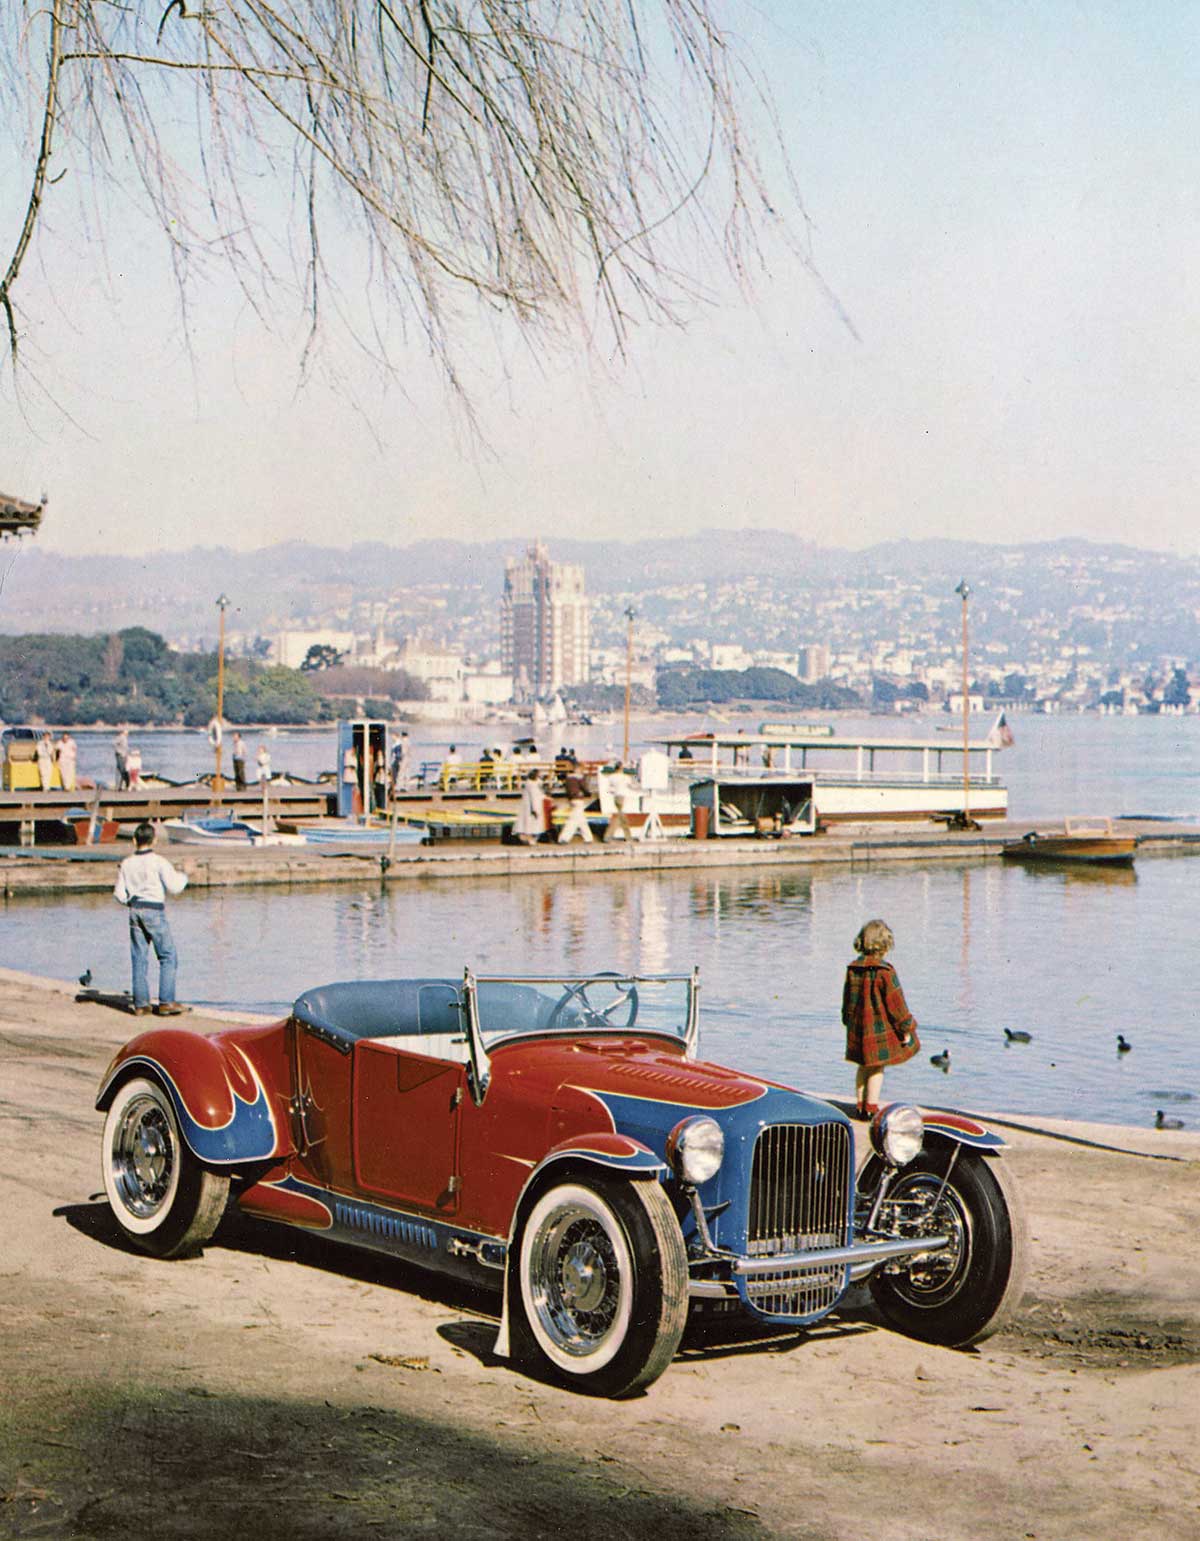 Vintage photograph of Frank Rose’s ’27 T bore one of Tommy’s more flamboyant scallop treatments when it won the 1954 America’s Most Beautiful Roadster award at Oakland. Shown here that year at Oakland’s Lake Merritt, the car featured a tubular frame and fender and hood metalwork by master shaper Jack Hageman Sr., a longtime Tommy The Greek collaborator.